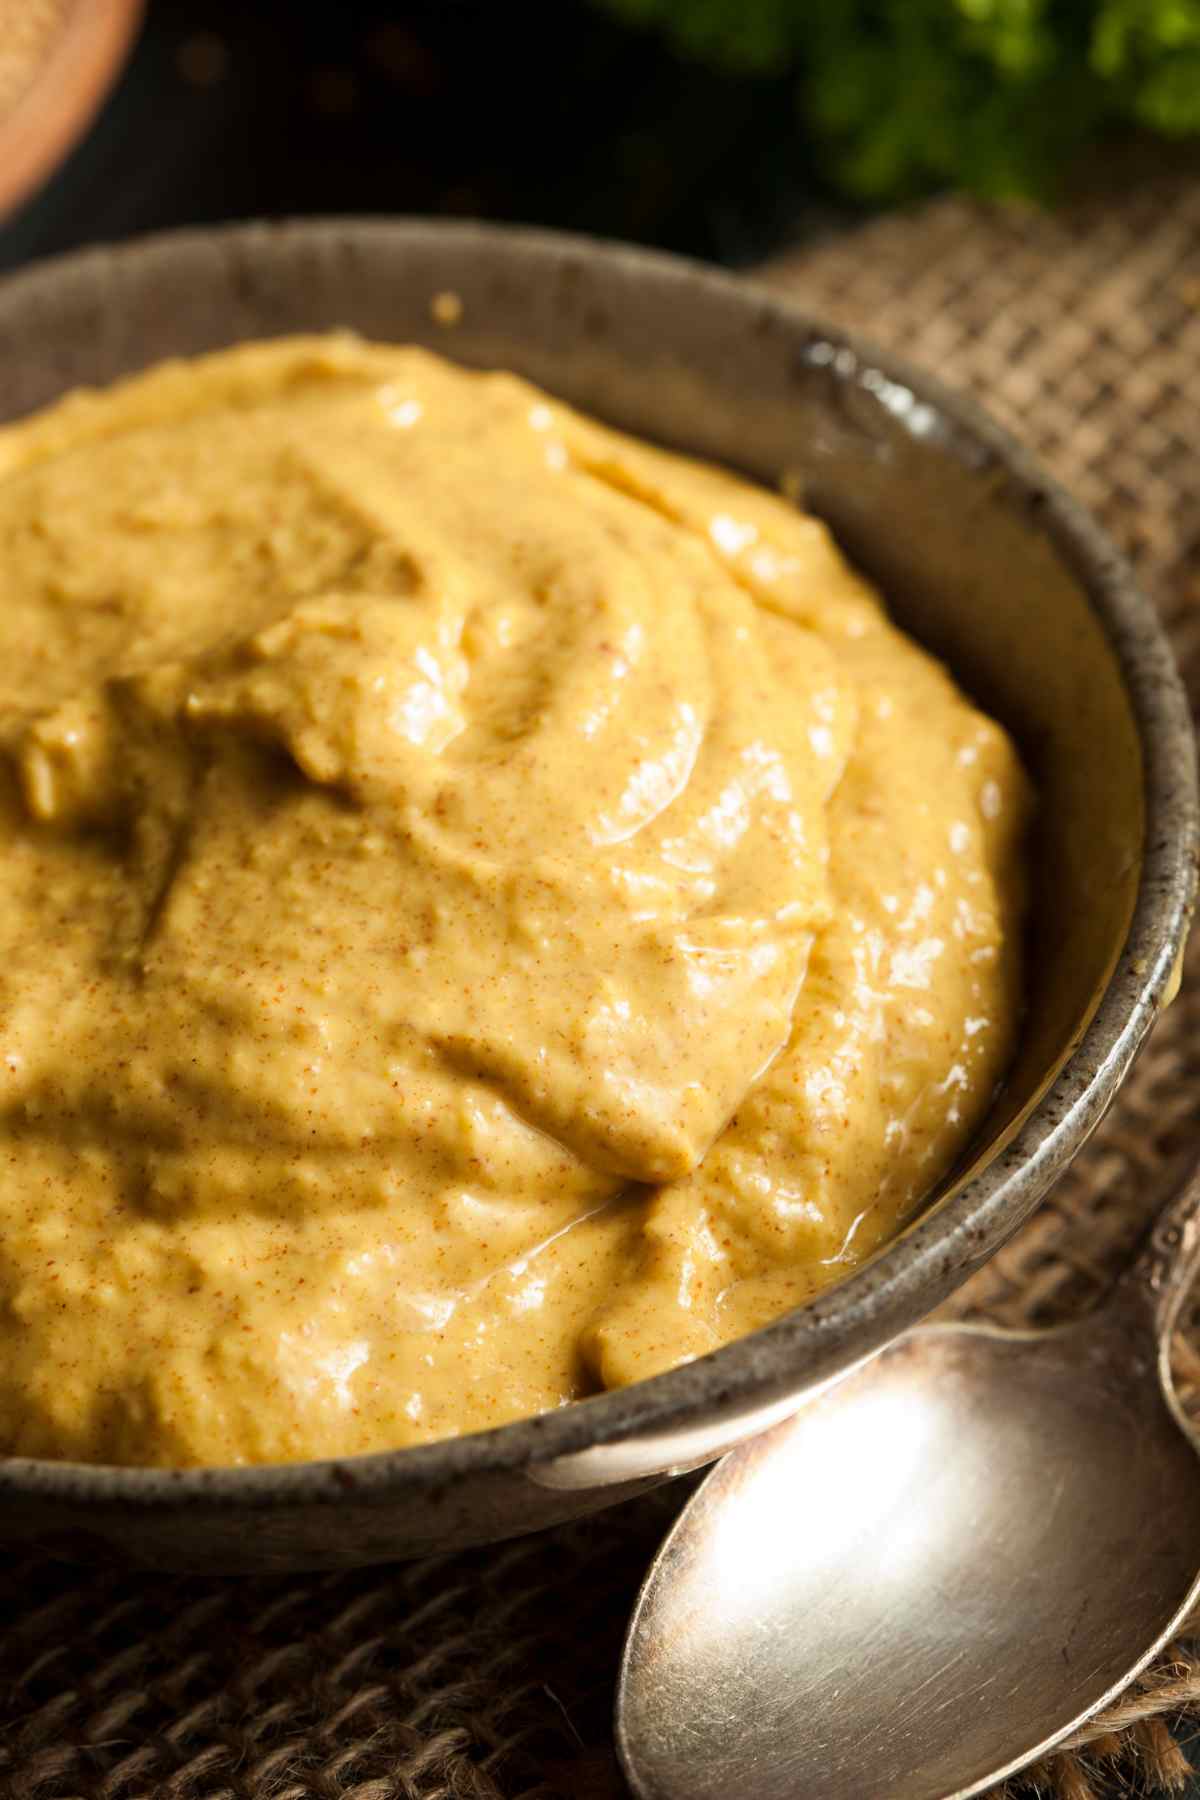 Is mustard keto-friendly? How many carbs are in mustard? For most of us, this is one of our favorite condiments, right? We get it! But what does the nutritional content look like? How much of it is safe to eat on a keto diet?